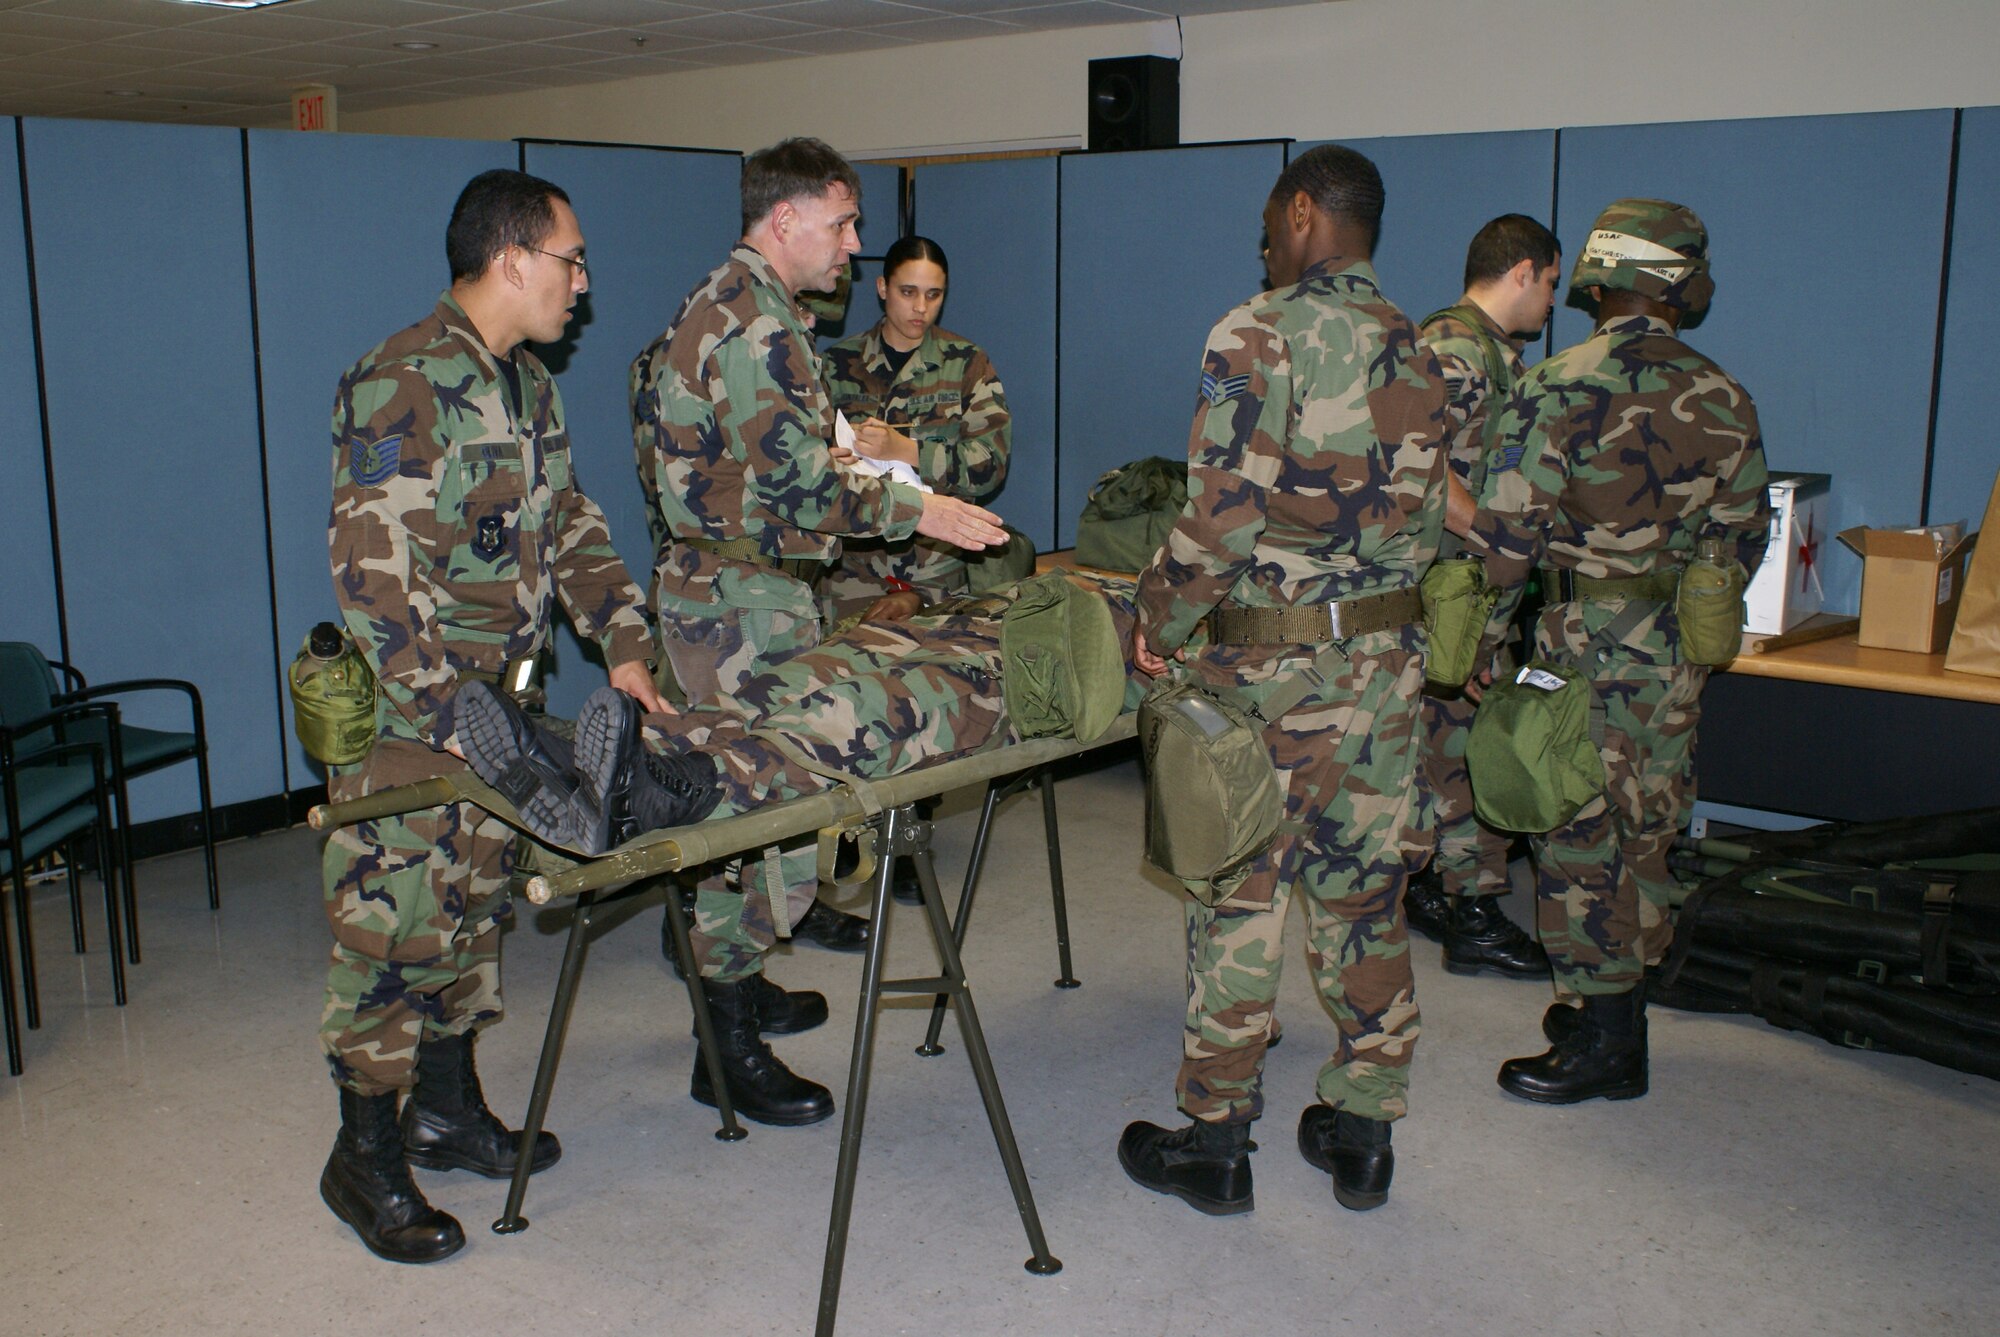 Maj. Phillip Dlugasch, a clinical nurse assigned to the 482nd Medical Squadron, instructs his team medical technicians on proper triage and treatment methods during Operation Deliberate Tropic, Homestead Air Reserve Base, March 11, 2008.  The Operational Readiness Exercise is a self-assessment of the wing’s ability to perform in a simulated combat environment. Explosive devices, smoke grenades and sirens will be used during the exercise to create realistic scenarios that reservists will encounter during the exercise. “Homestead Air Reserve Base goes to great lengths to ensure safety procedures are established and followed during exercises to prepare our reservists for deployment,” said Mr. Sean Quinn, 482nd Mission Support Group Emergency Management Office. (U.S. Air Force photo/Tim Norton)